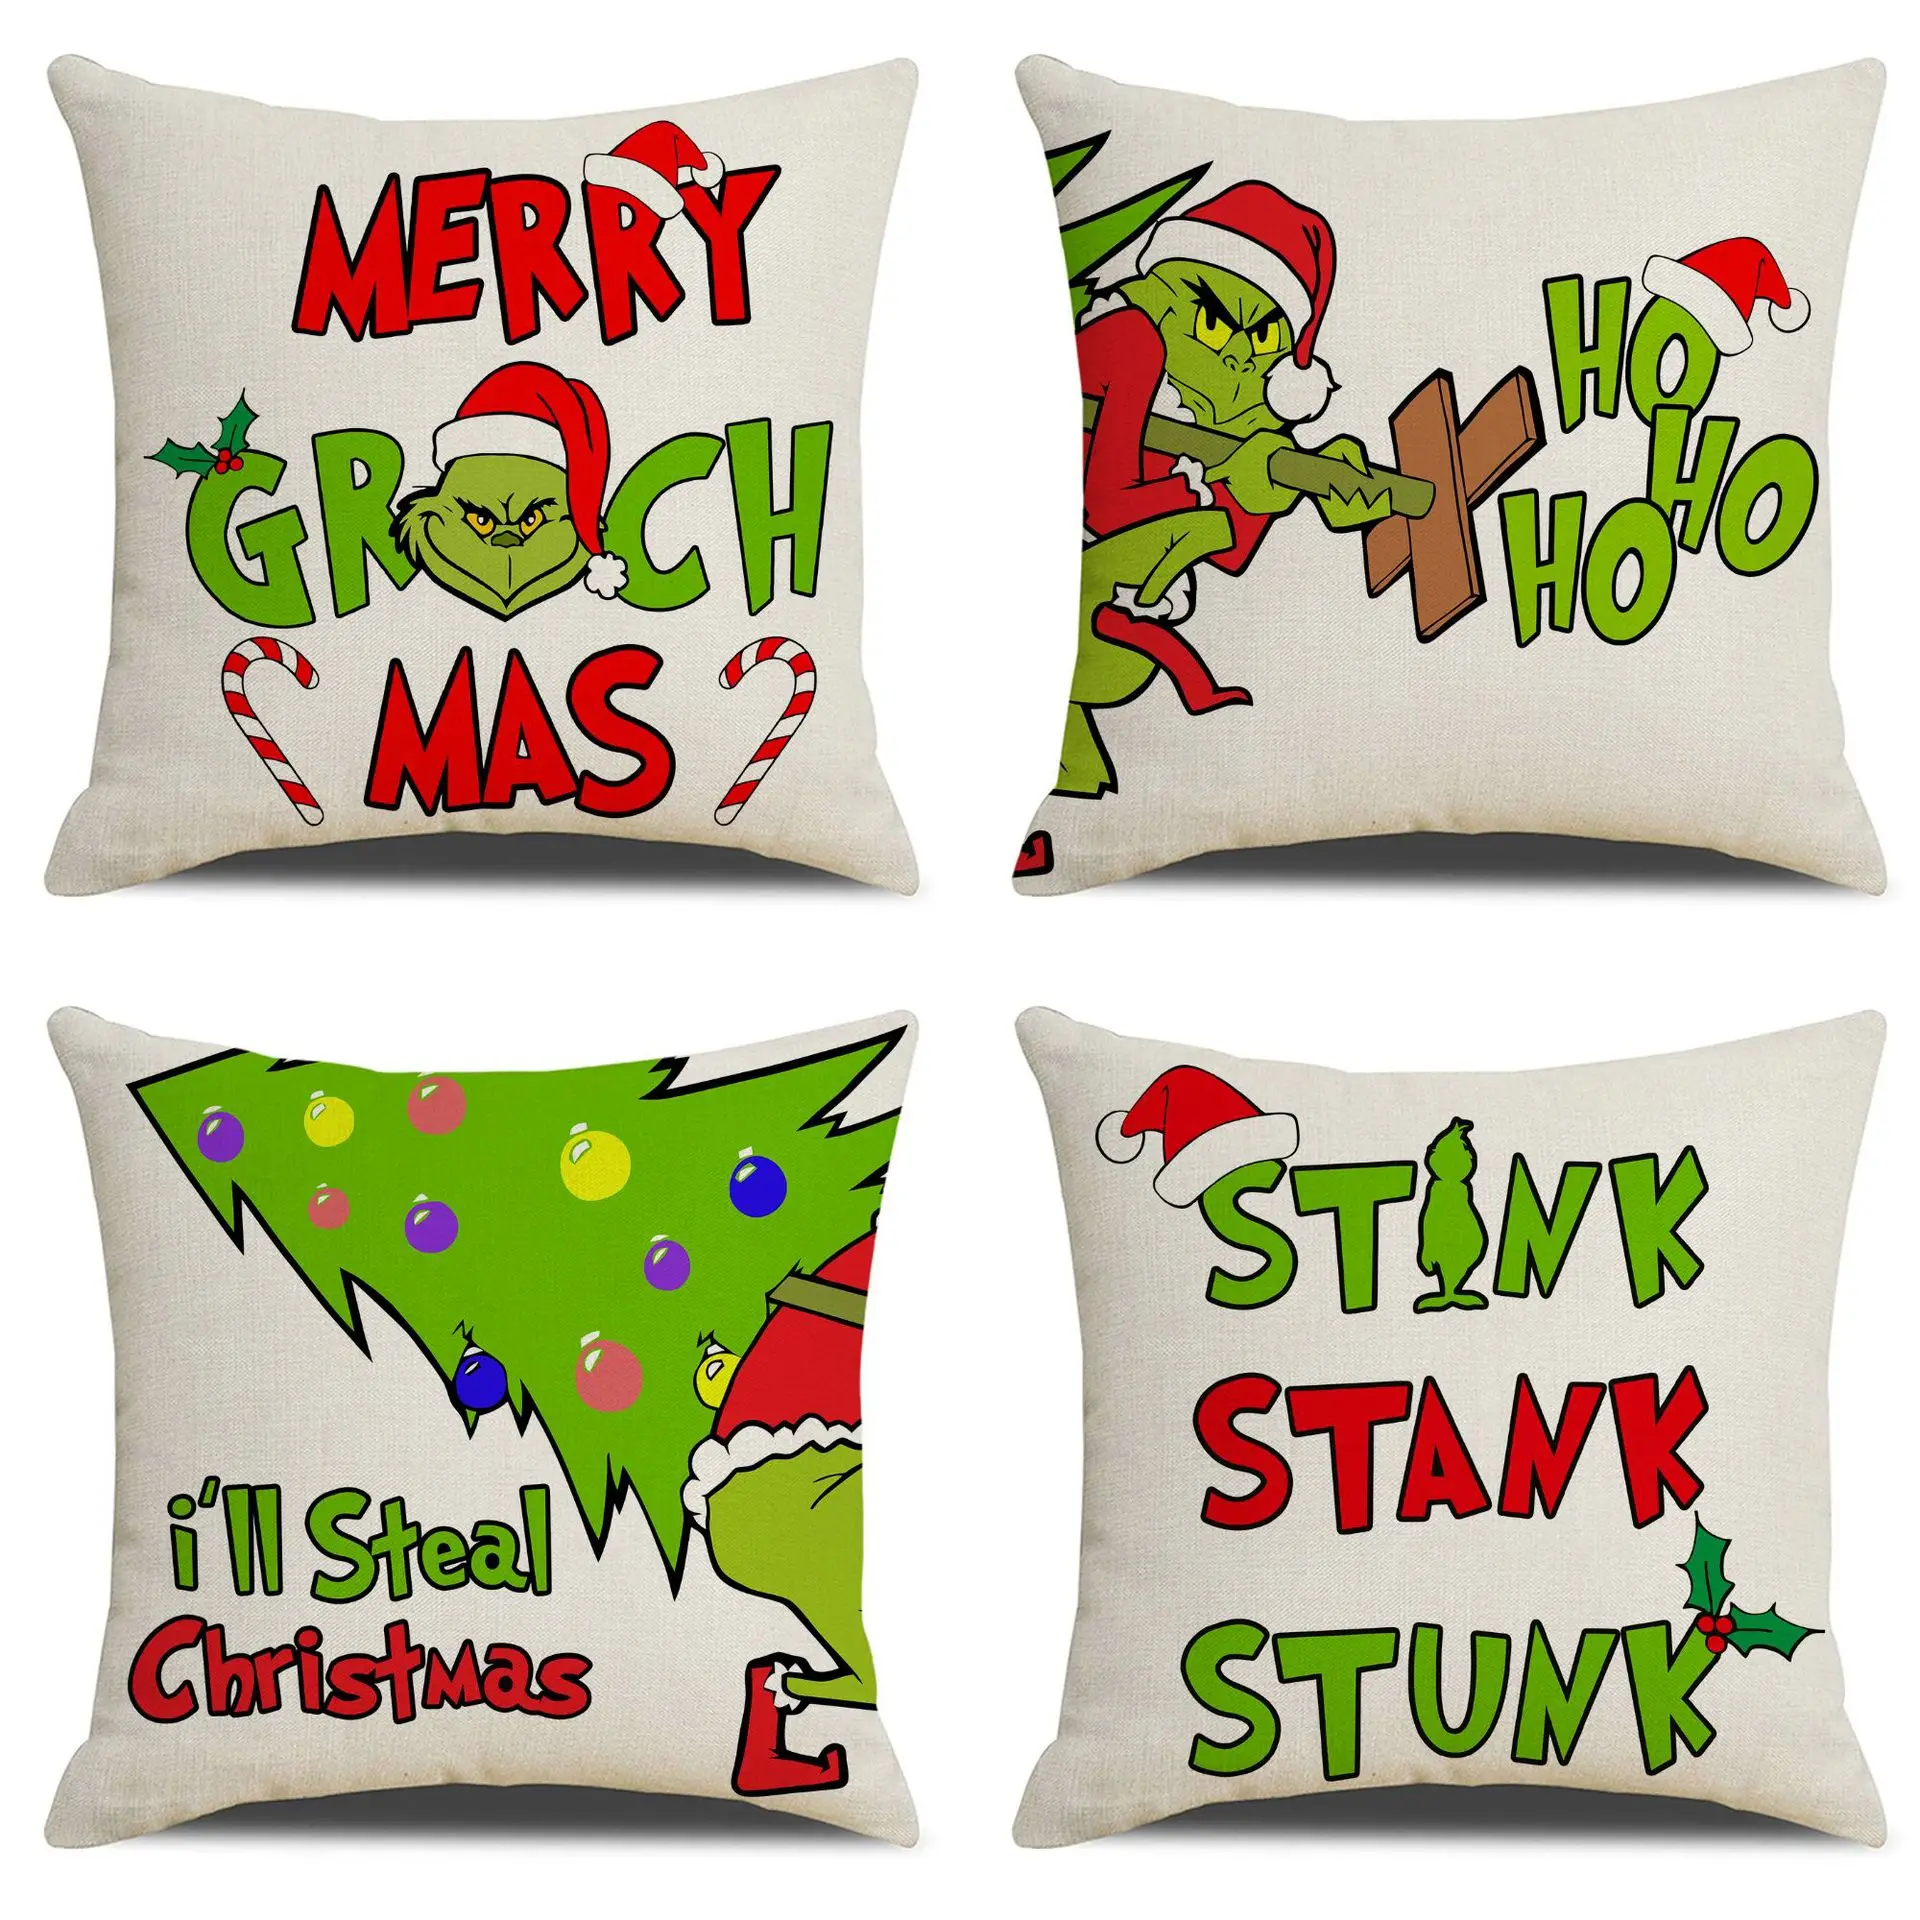 

Christmas Decorating Pillow Covers 18x18 inches Set of 4 for Home Decor Cartoon Merry Glinch Mas Throw Pillow Cushion Case